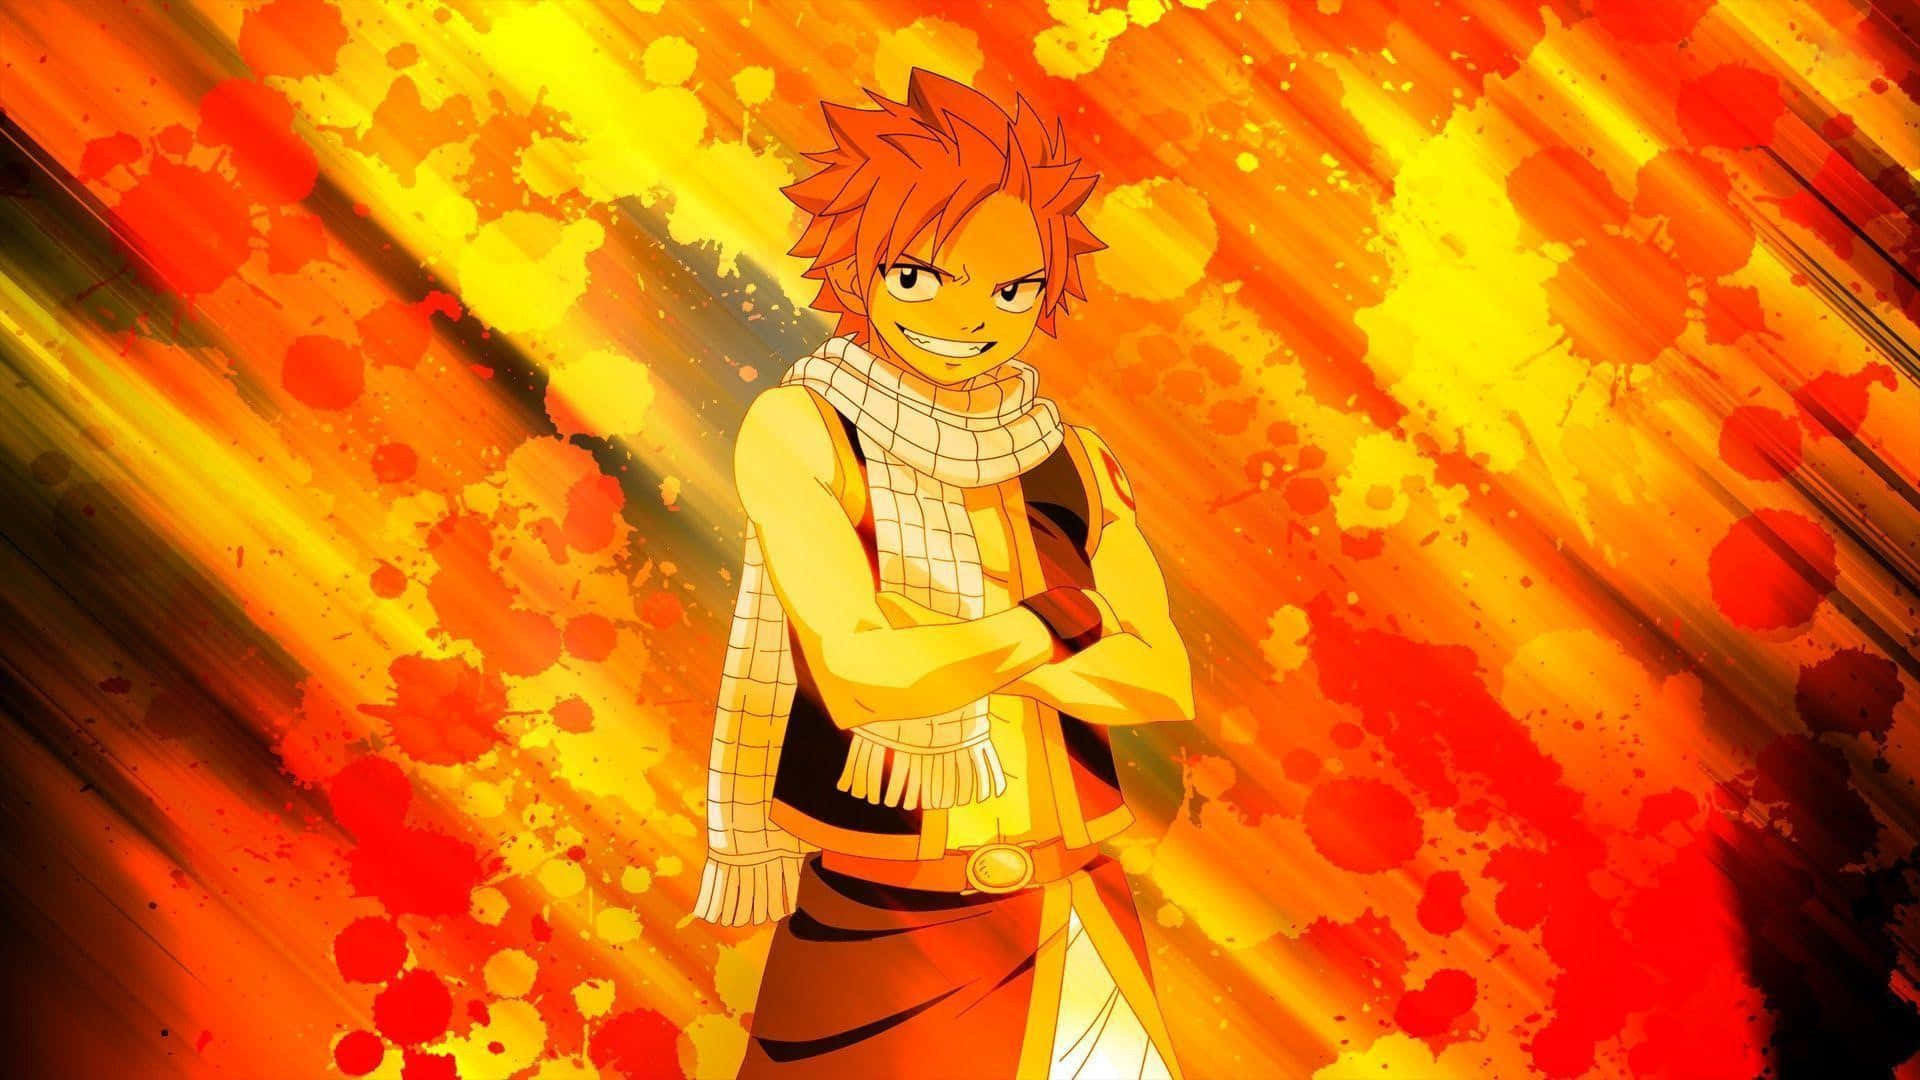 Natsu Dragneel In Action - Fairy Tail's Fierce Fire Dragon Slayer Background